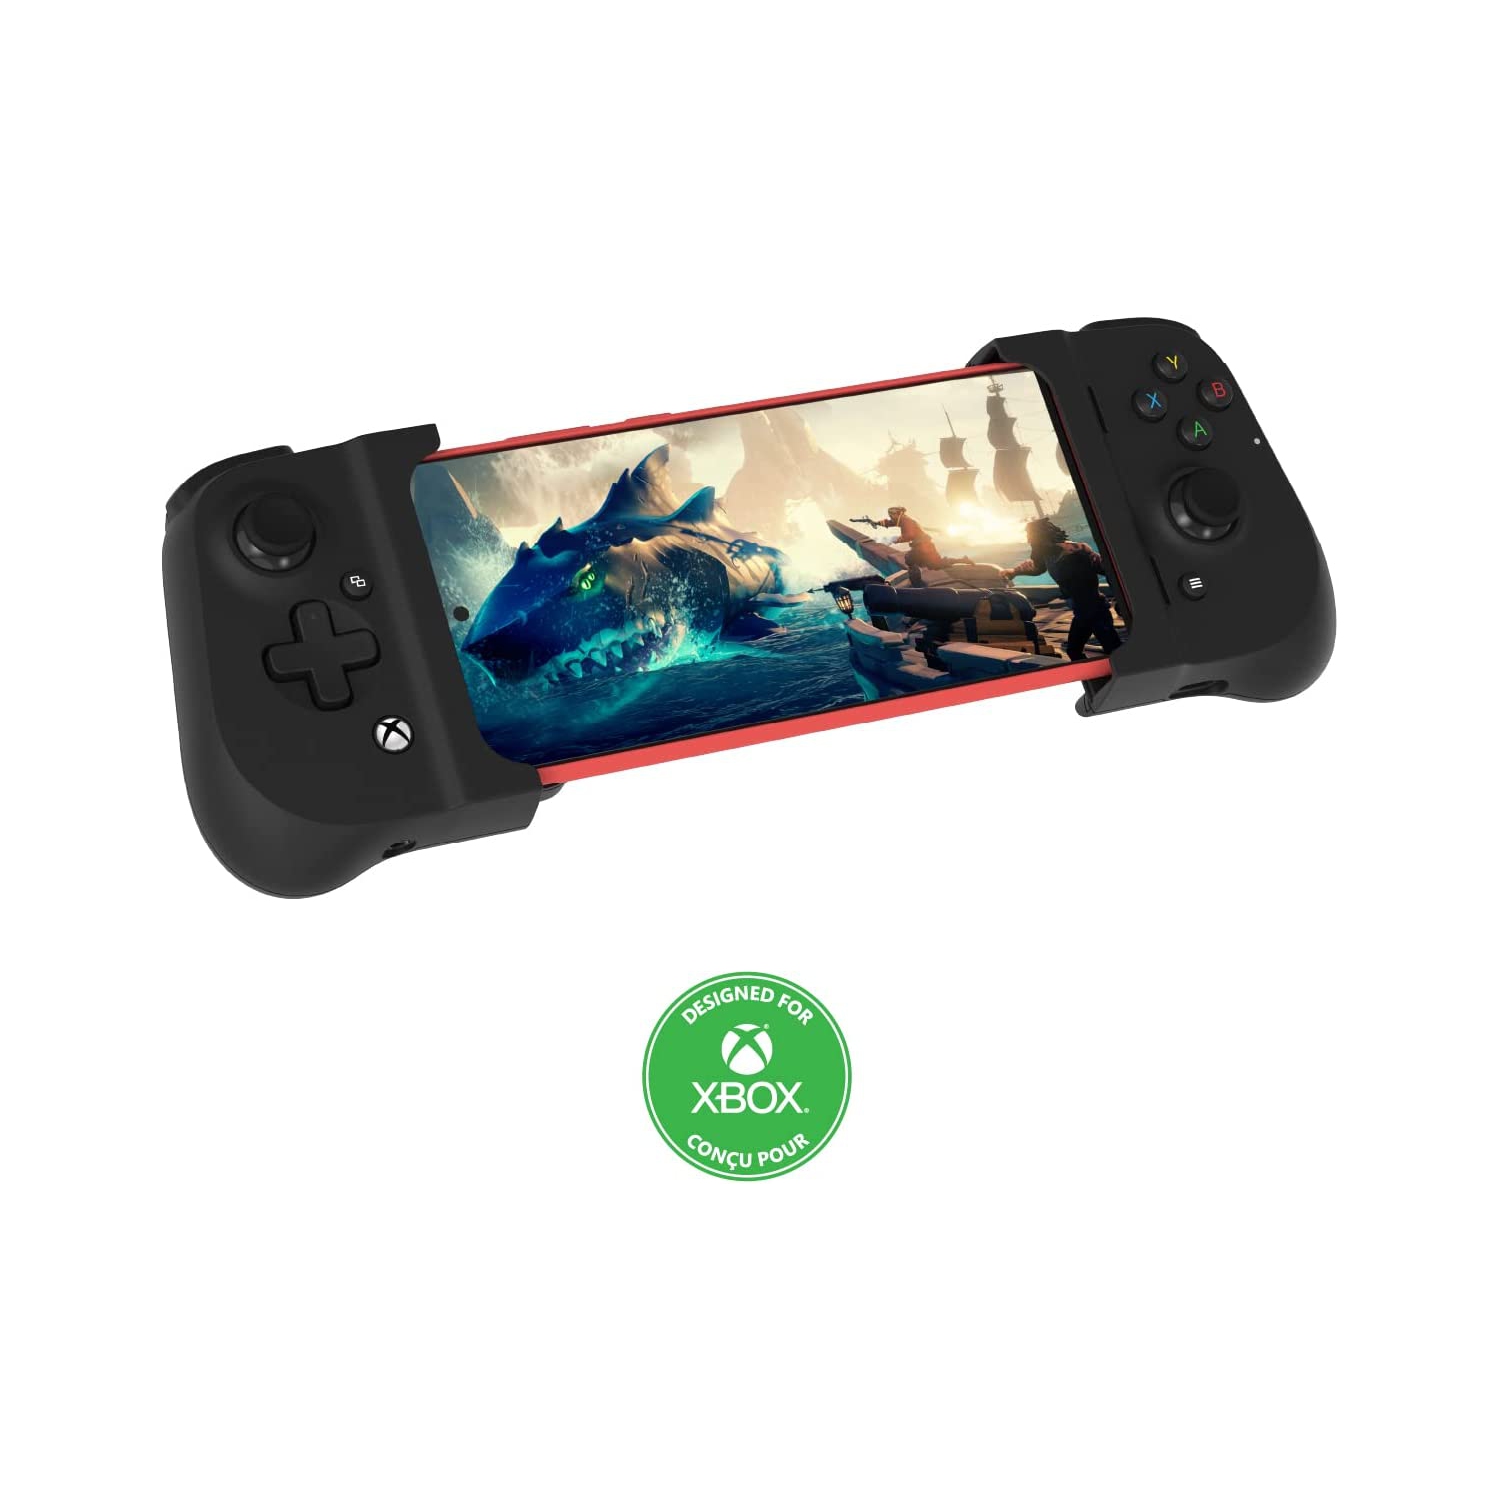 Gamevice FLEX for Android – Universal Mobile Game Controller / Gamepad for Android with PHONE CASE Support – FREE 1 month Xbox Game Pass Ultimate, Play Xbox, GeForceNOW – 3.5mm Hea